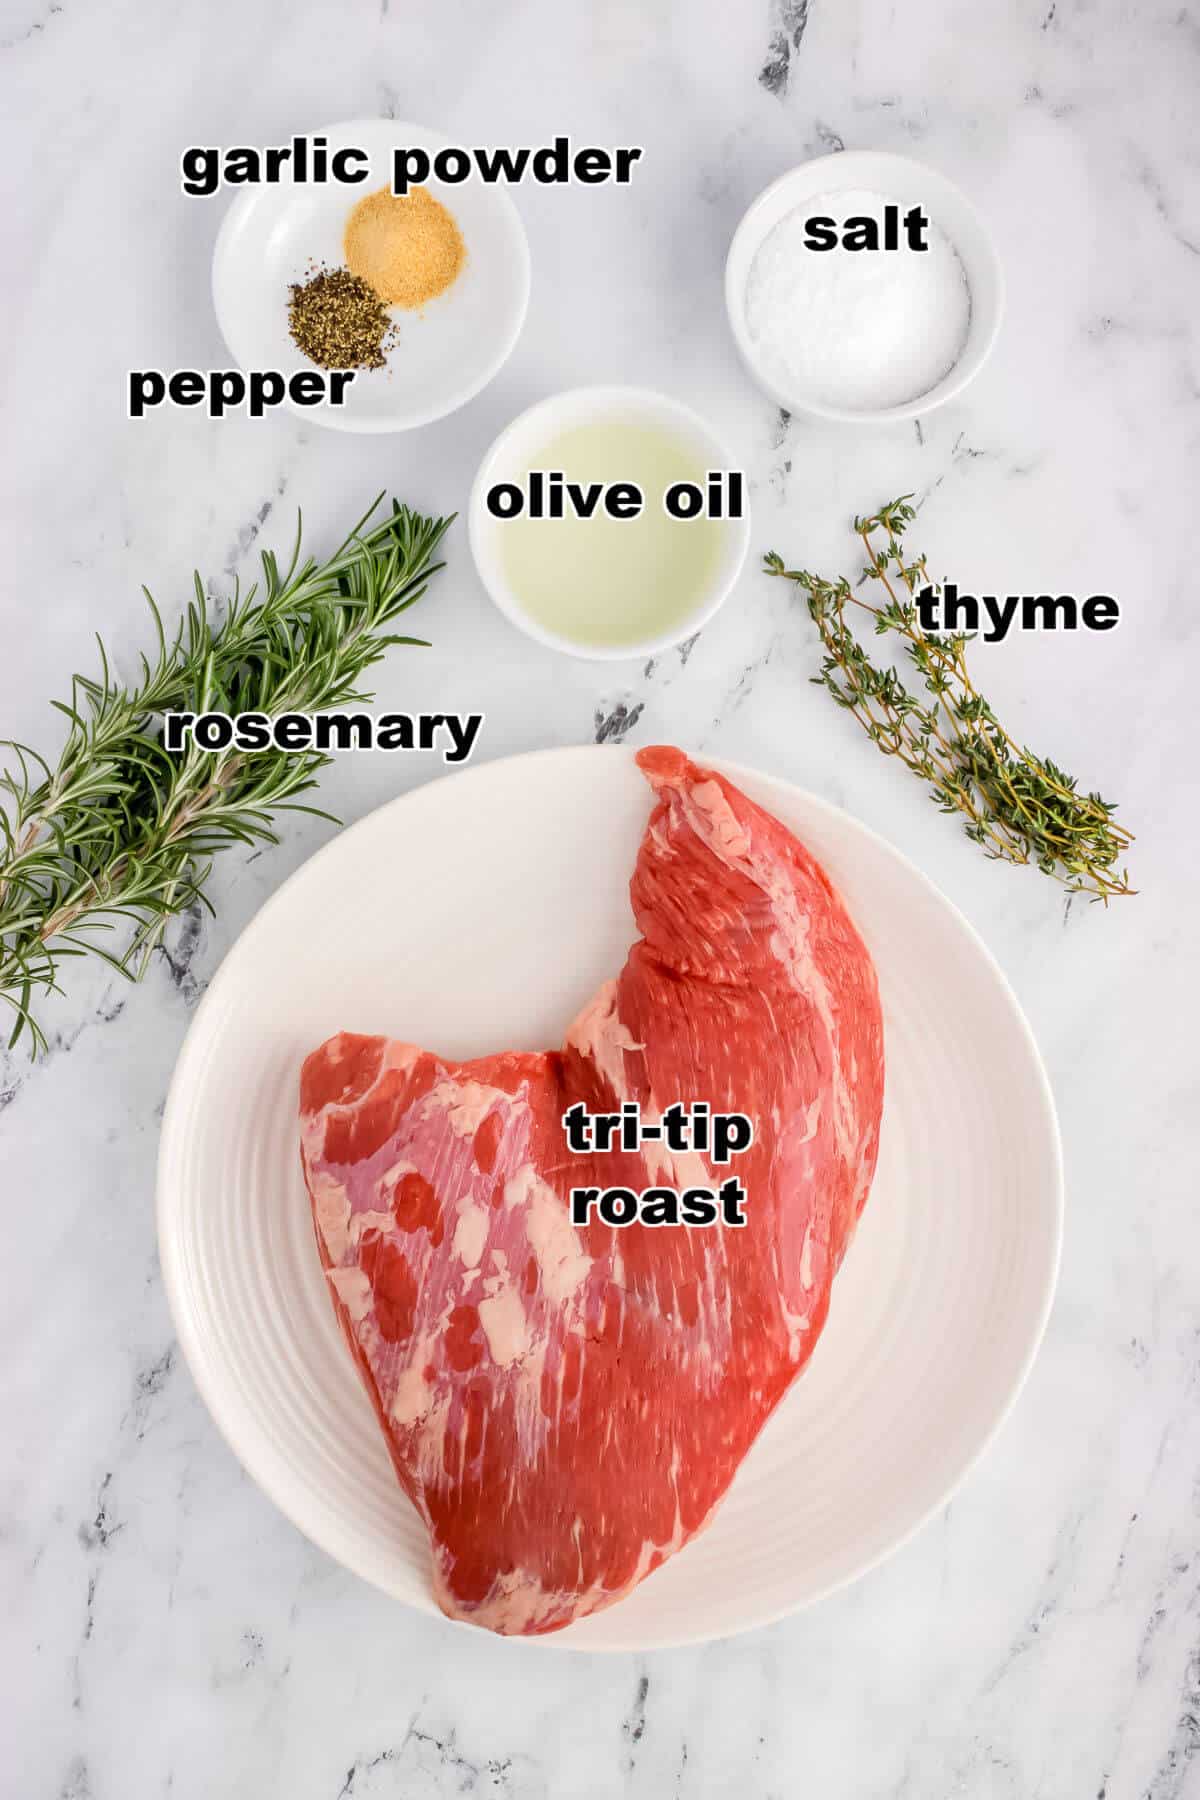 Ingredients needed to make sous vide tri-tip roast. Tri-tip, salt, pepper, garlic powder, olive oil, rosemary, and thyme.